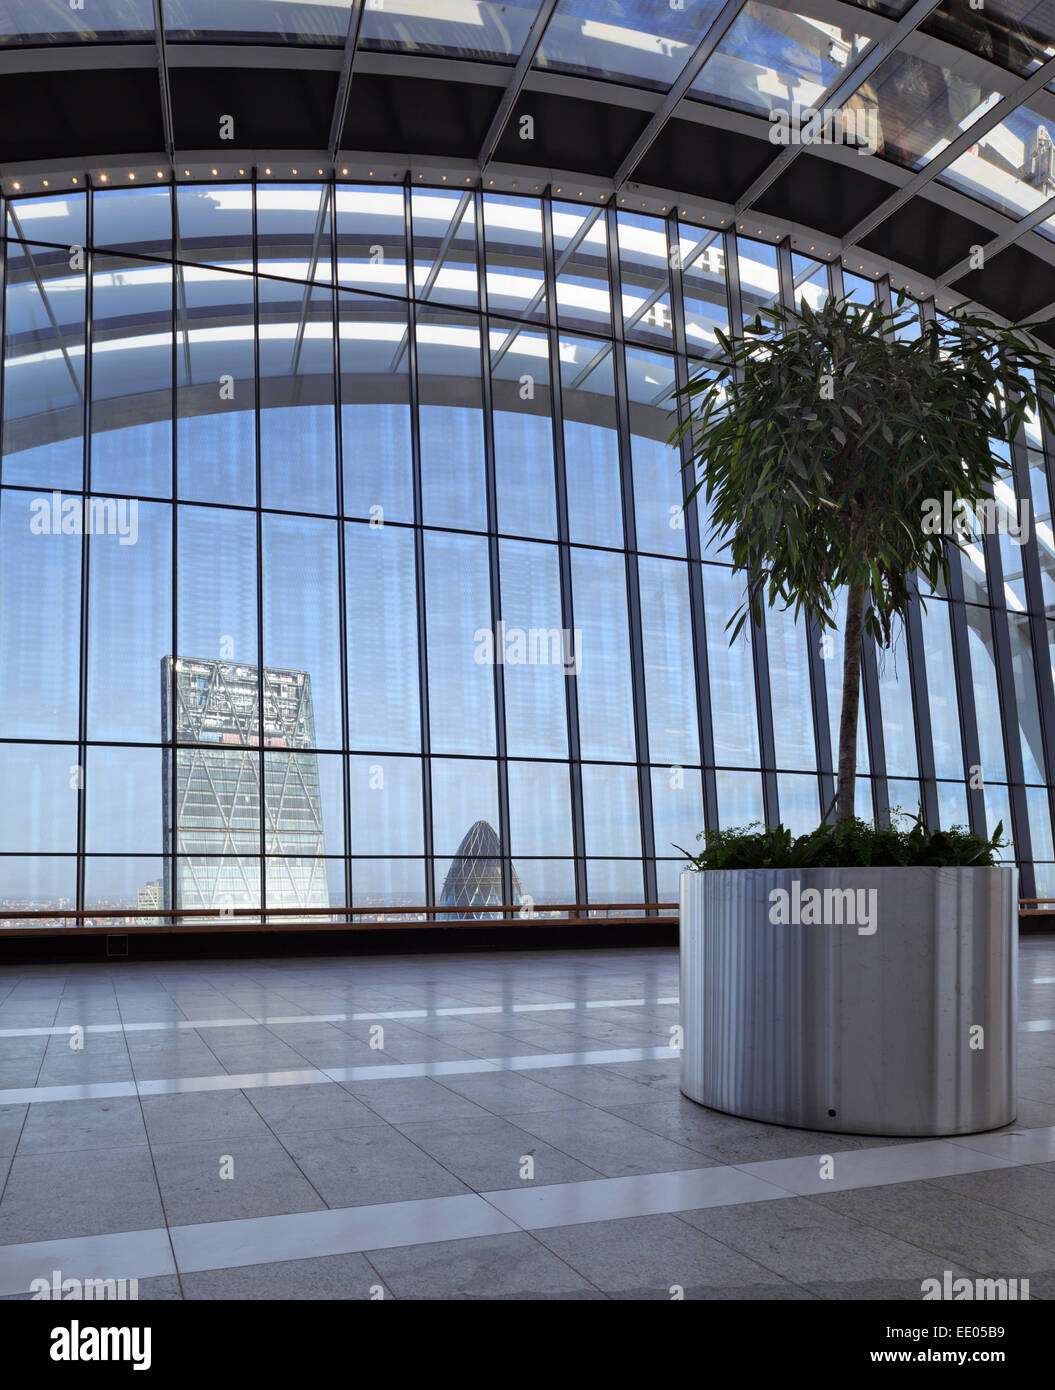 London, UK. 11th January, 2015. Sky garden at top of 20 Fenchurch street aka 'Walkie Talkie' Building opens for the public on 12th January 2015, London, UK Credit:  David Bleeker Photography.com/Alamy Live News Stock Photo